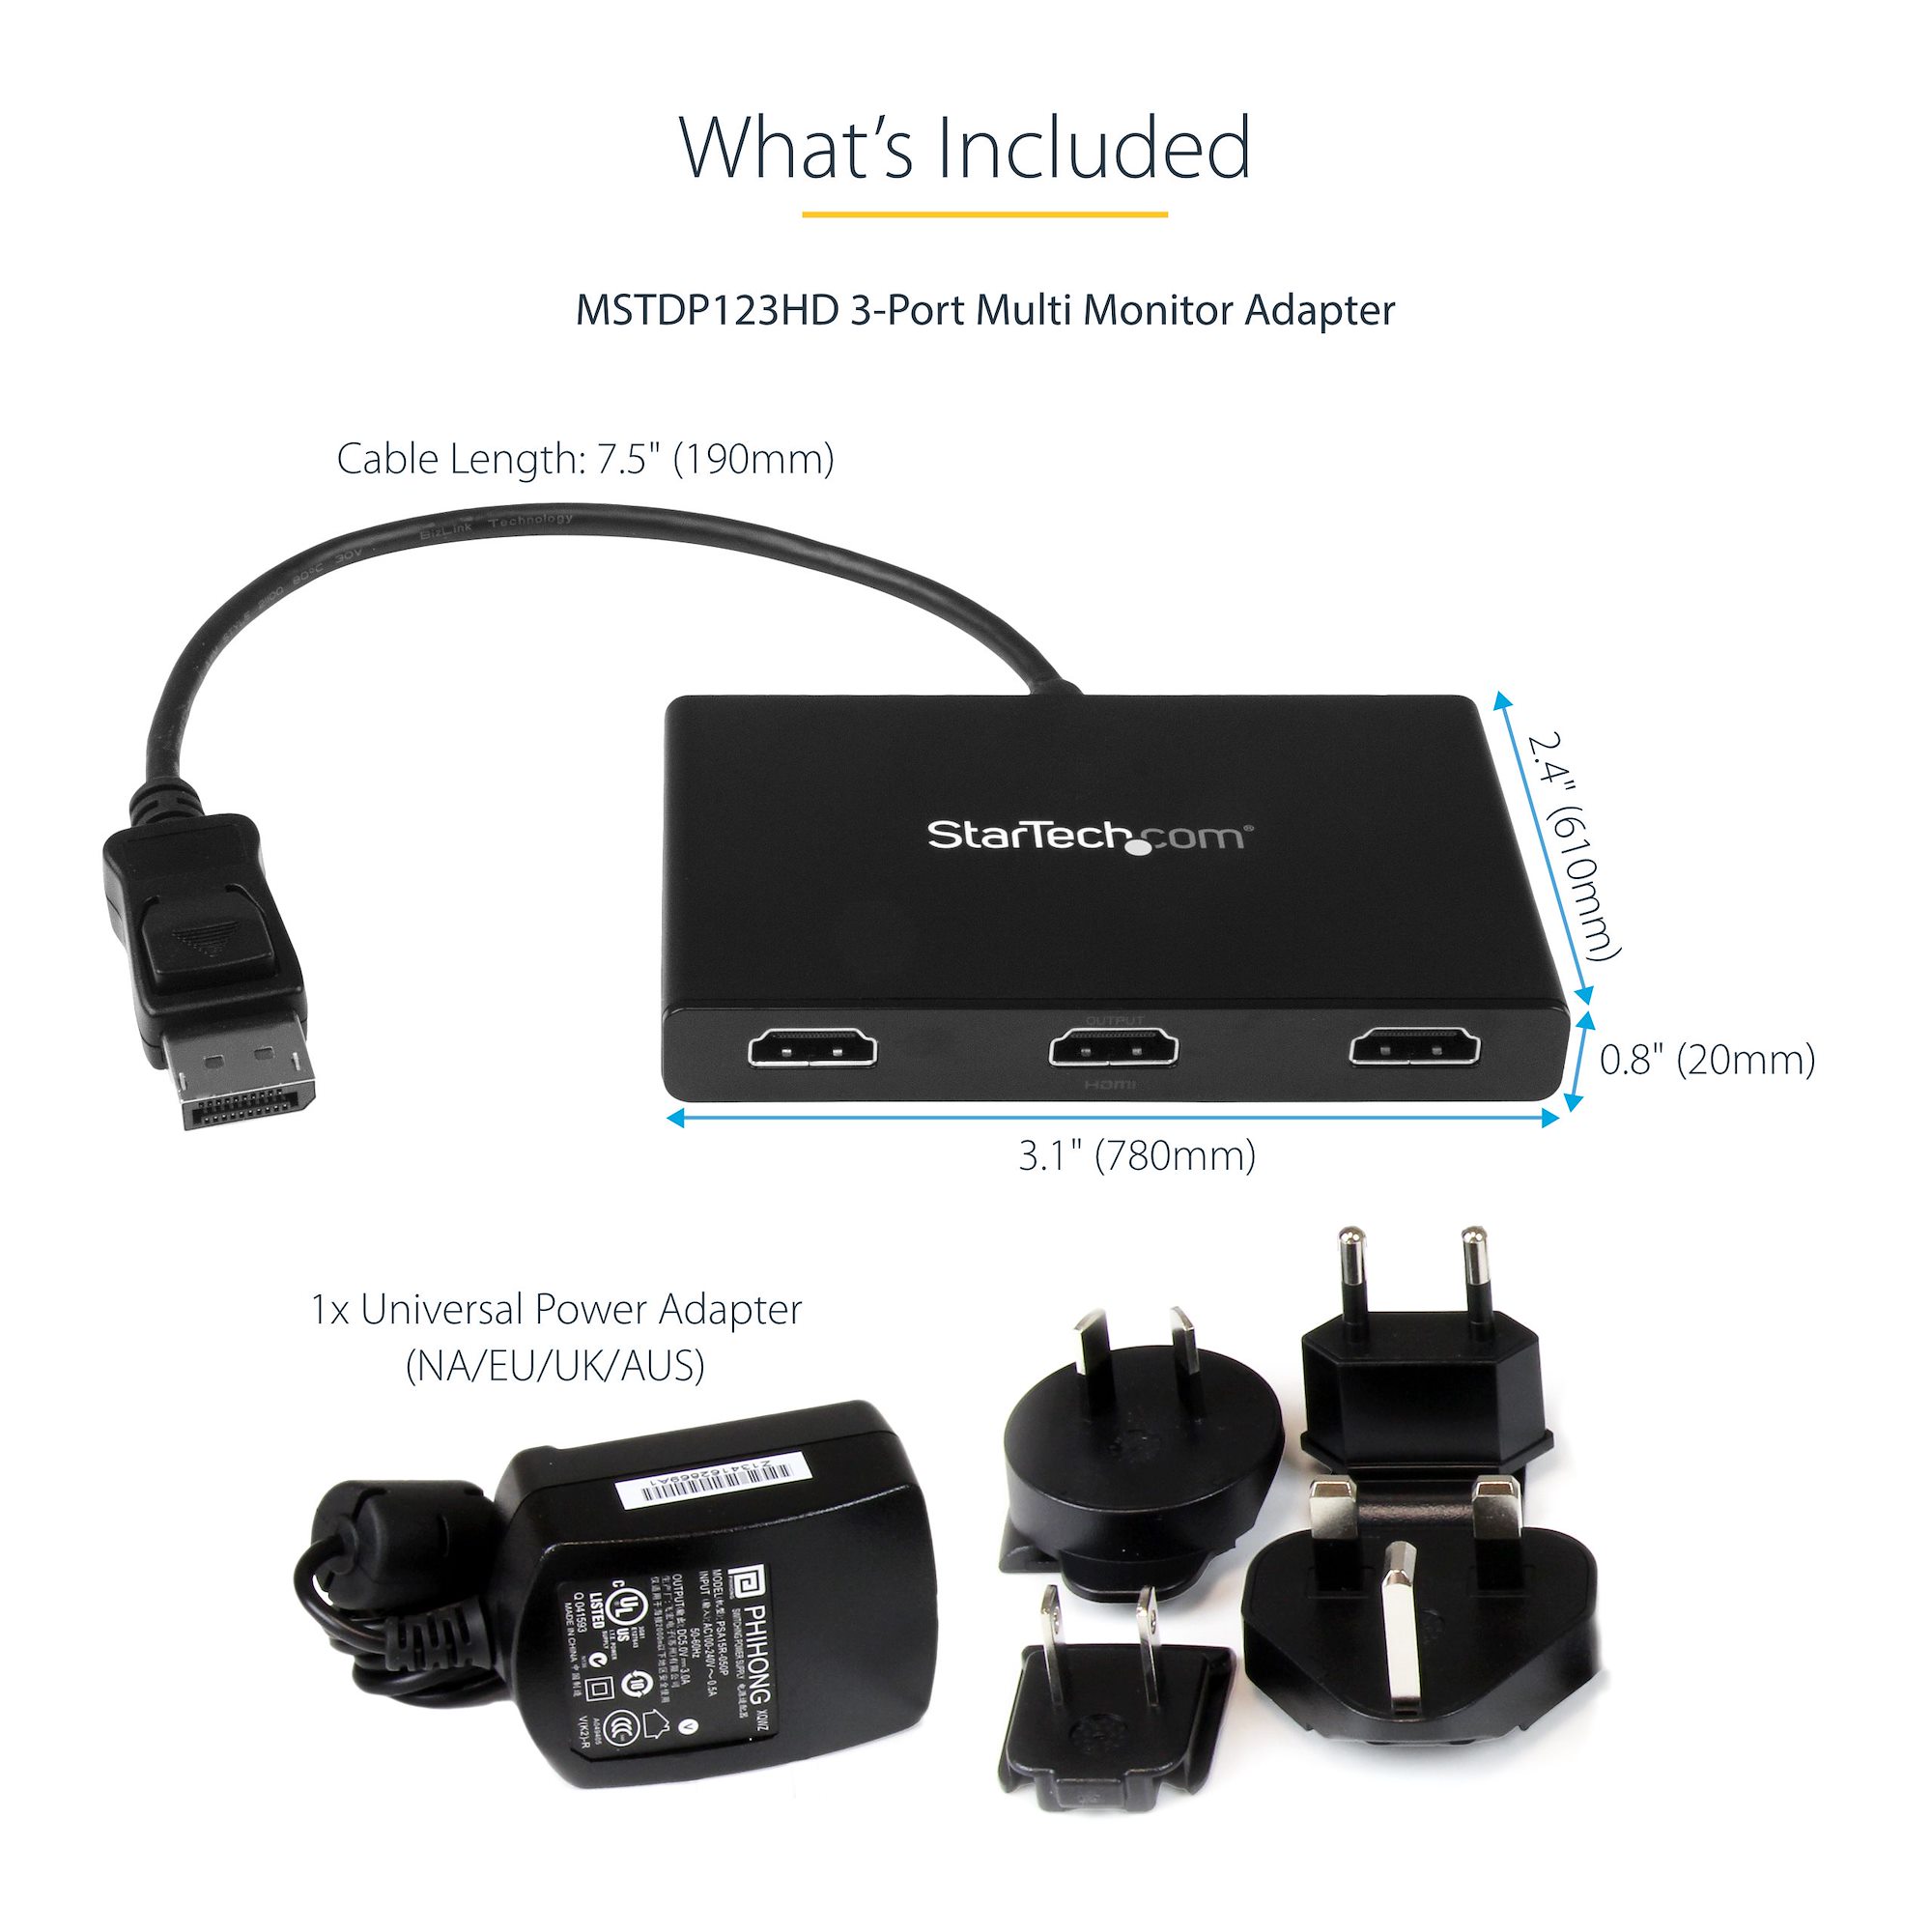  StarTech.com 3-Port Multi Monitor Adapter - DisplayPort 1.2 to  3x HDMI MST Hub - Triple 1080p HDMI Monitors - Extended or Cloned Display  mode - Windows PCs Only - DP to